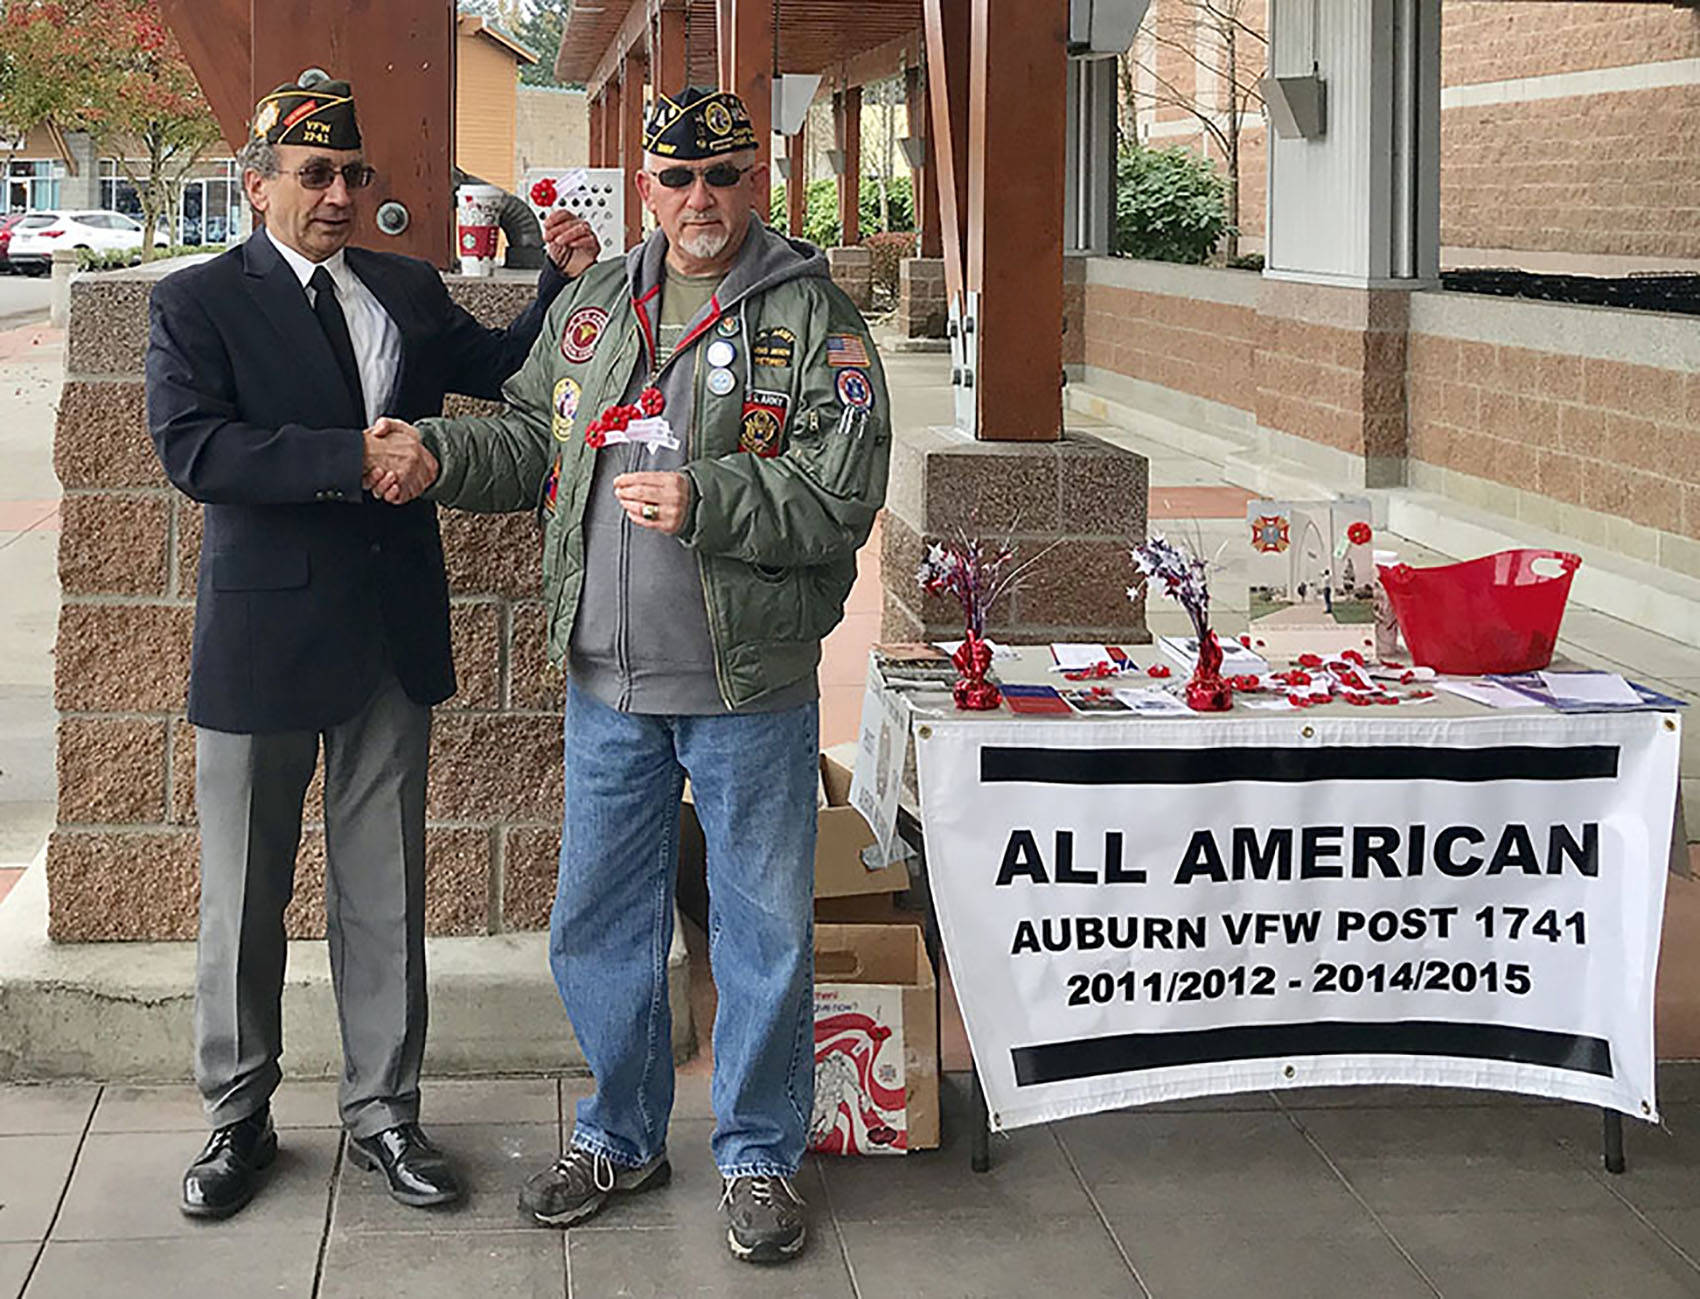 Michael Sepal, U.S. Army retired and life member and Officer of the Day, VFW Post 1741, Auburn, greets and presents Chriss Moen, Army retired and life member of Disabled American Veterans, Chapter A-One 33, Kent, with ‘buddy’ poppies and thanks him for his charitable donation. COURTESY PHOTO